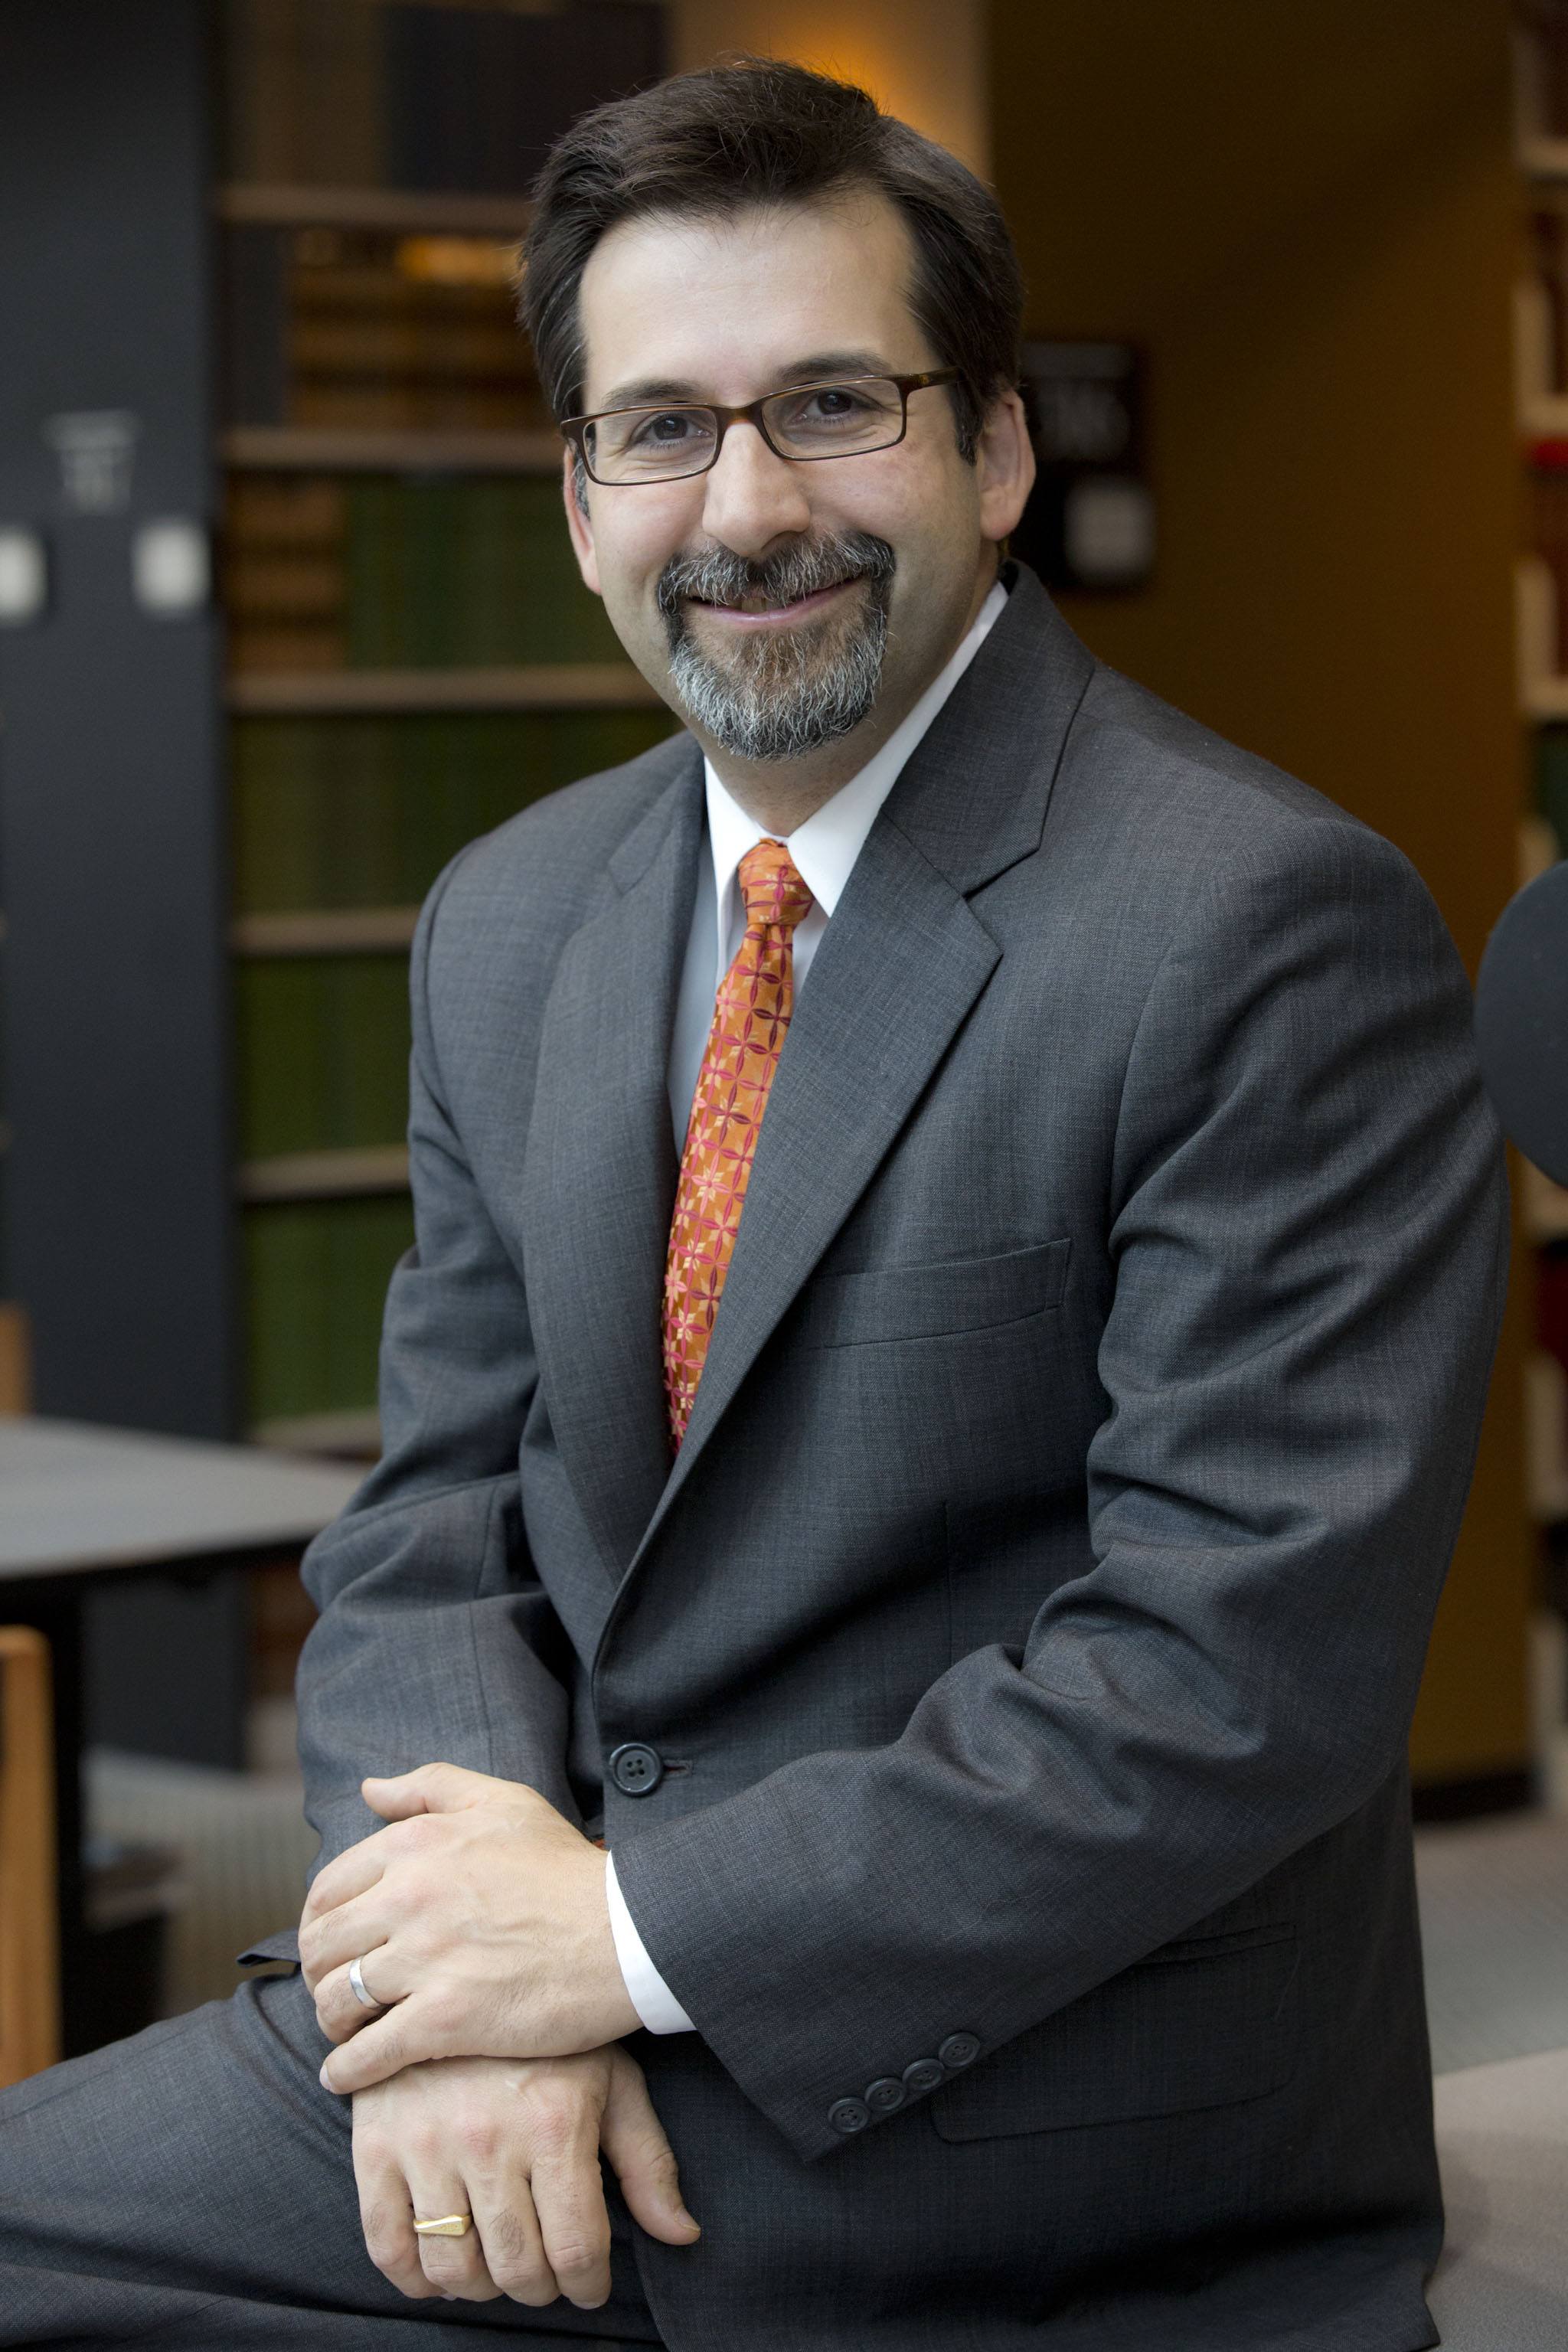 Texas A&M University has appointed Robert B. Ahdieh as dean and holder of the Anthony G. Buzbee Endowed Dean’s Chair at its School of Law, located in Fort Worth. (Emory University School of Law)